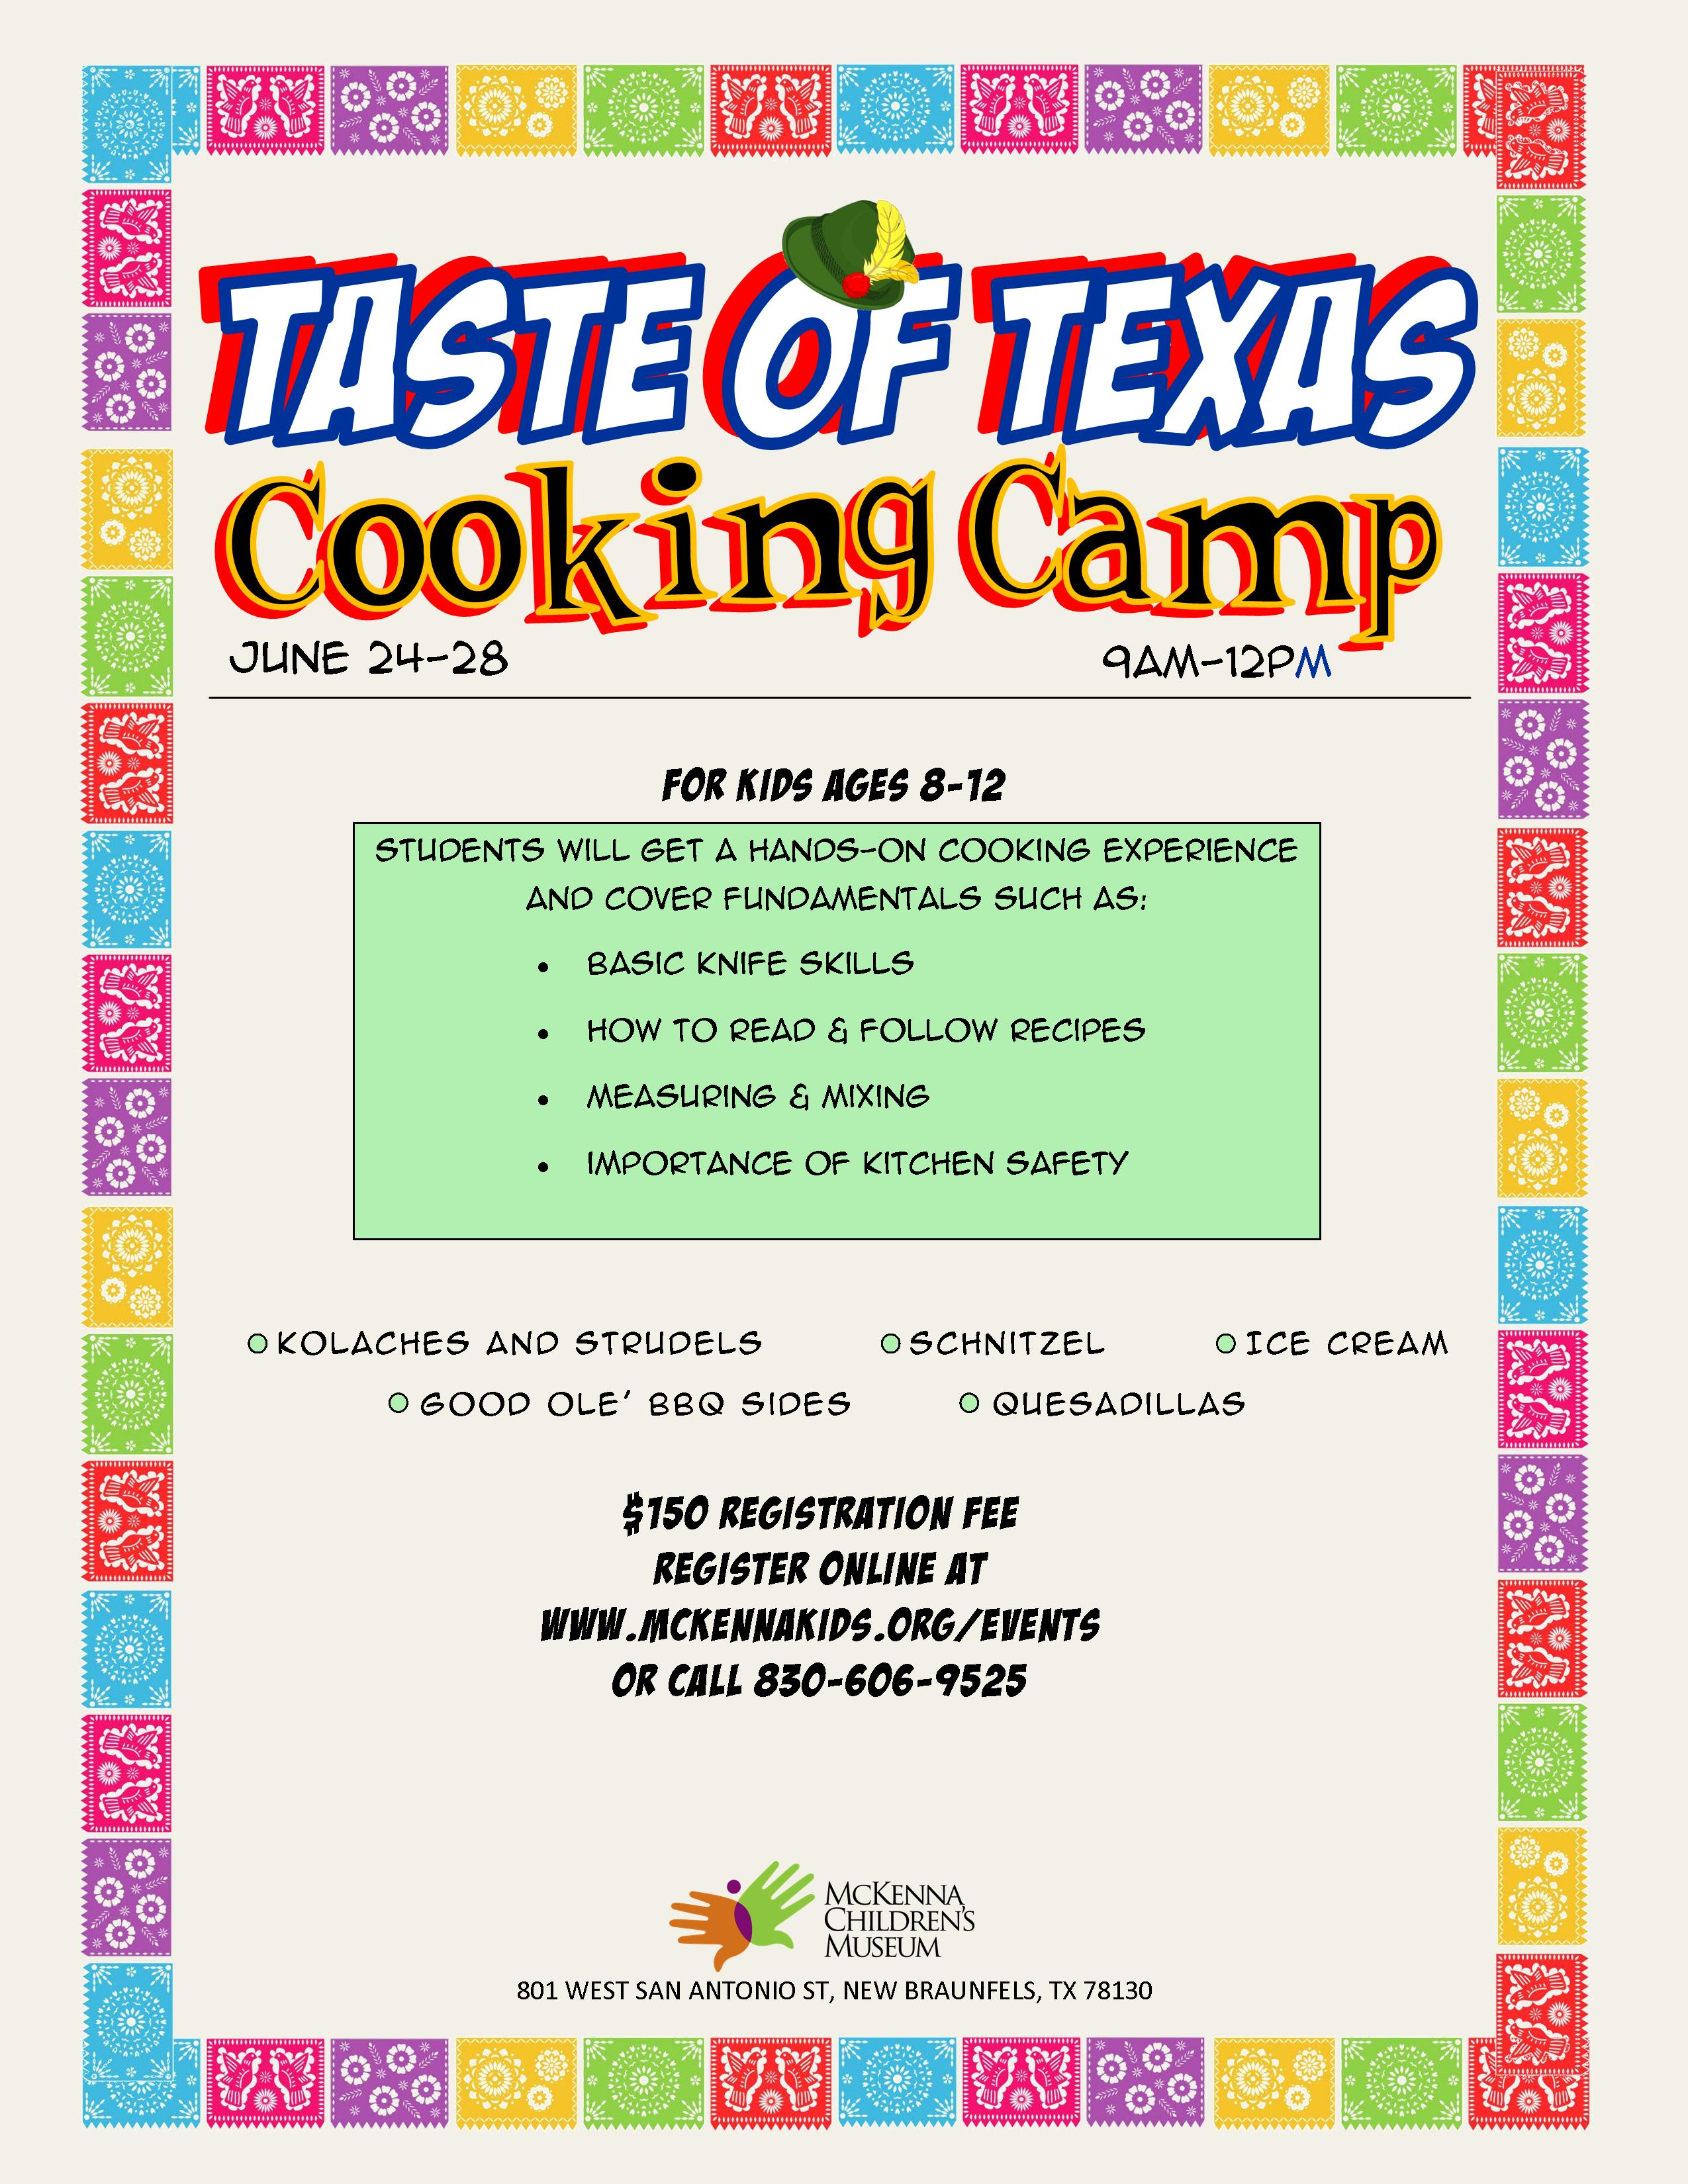 downtown New Braunfels taste of Texas cooking camp